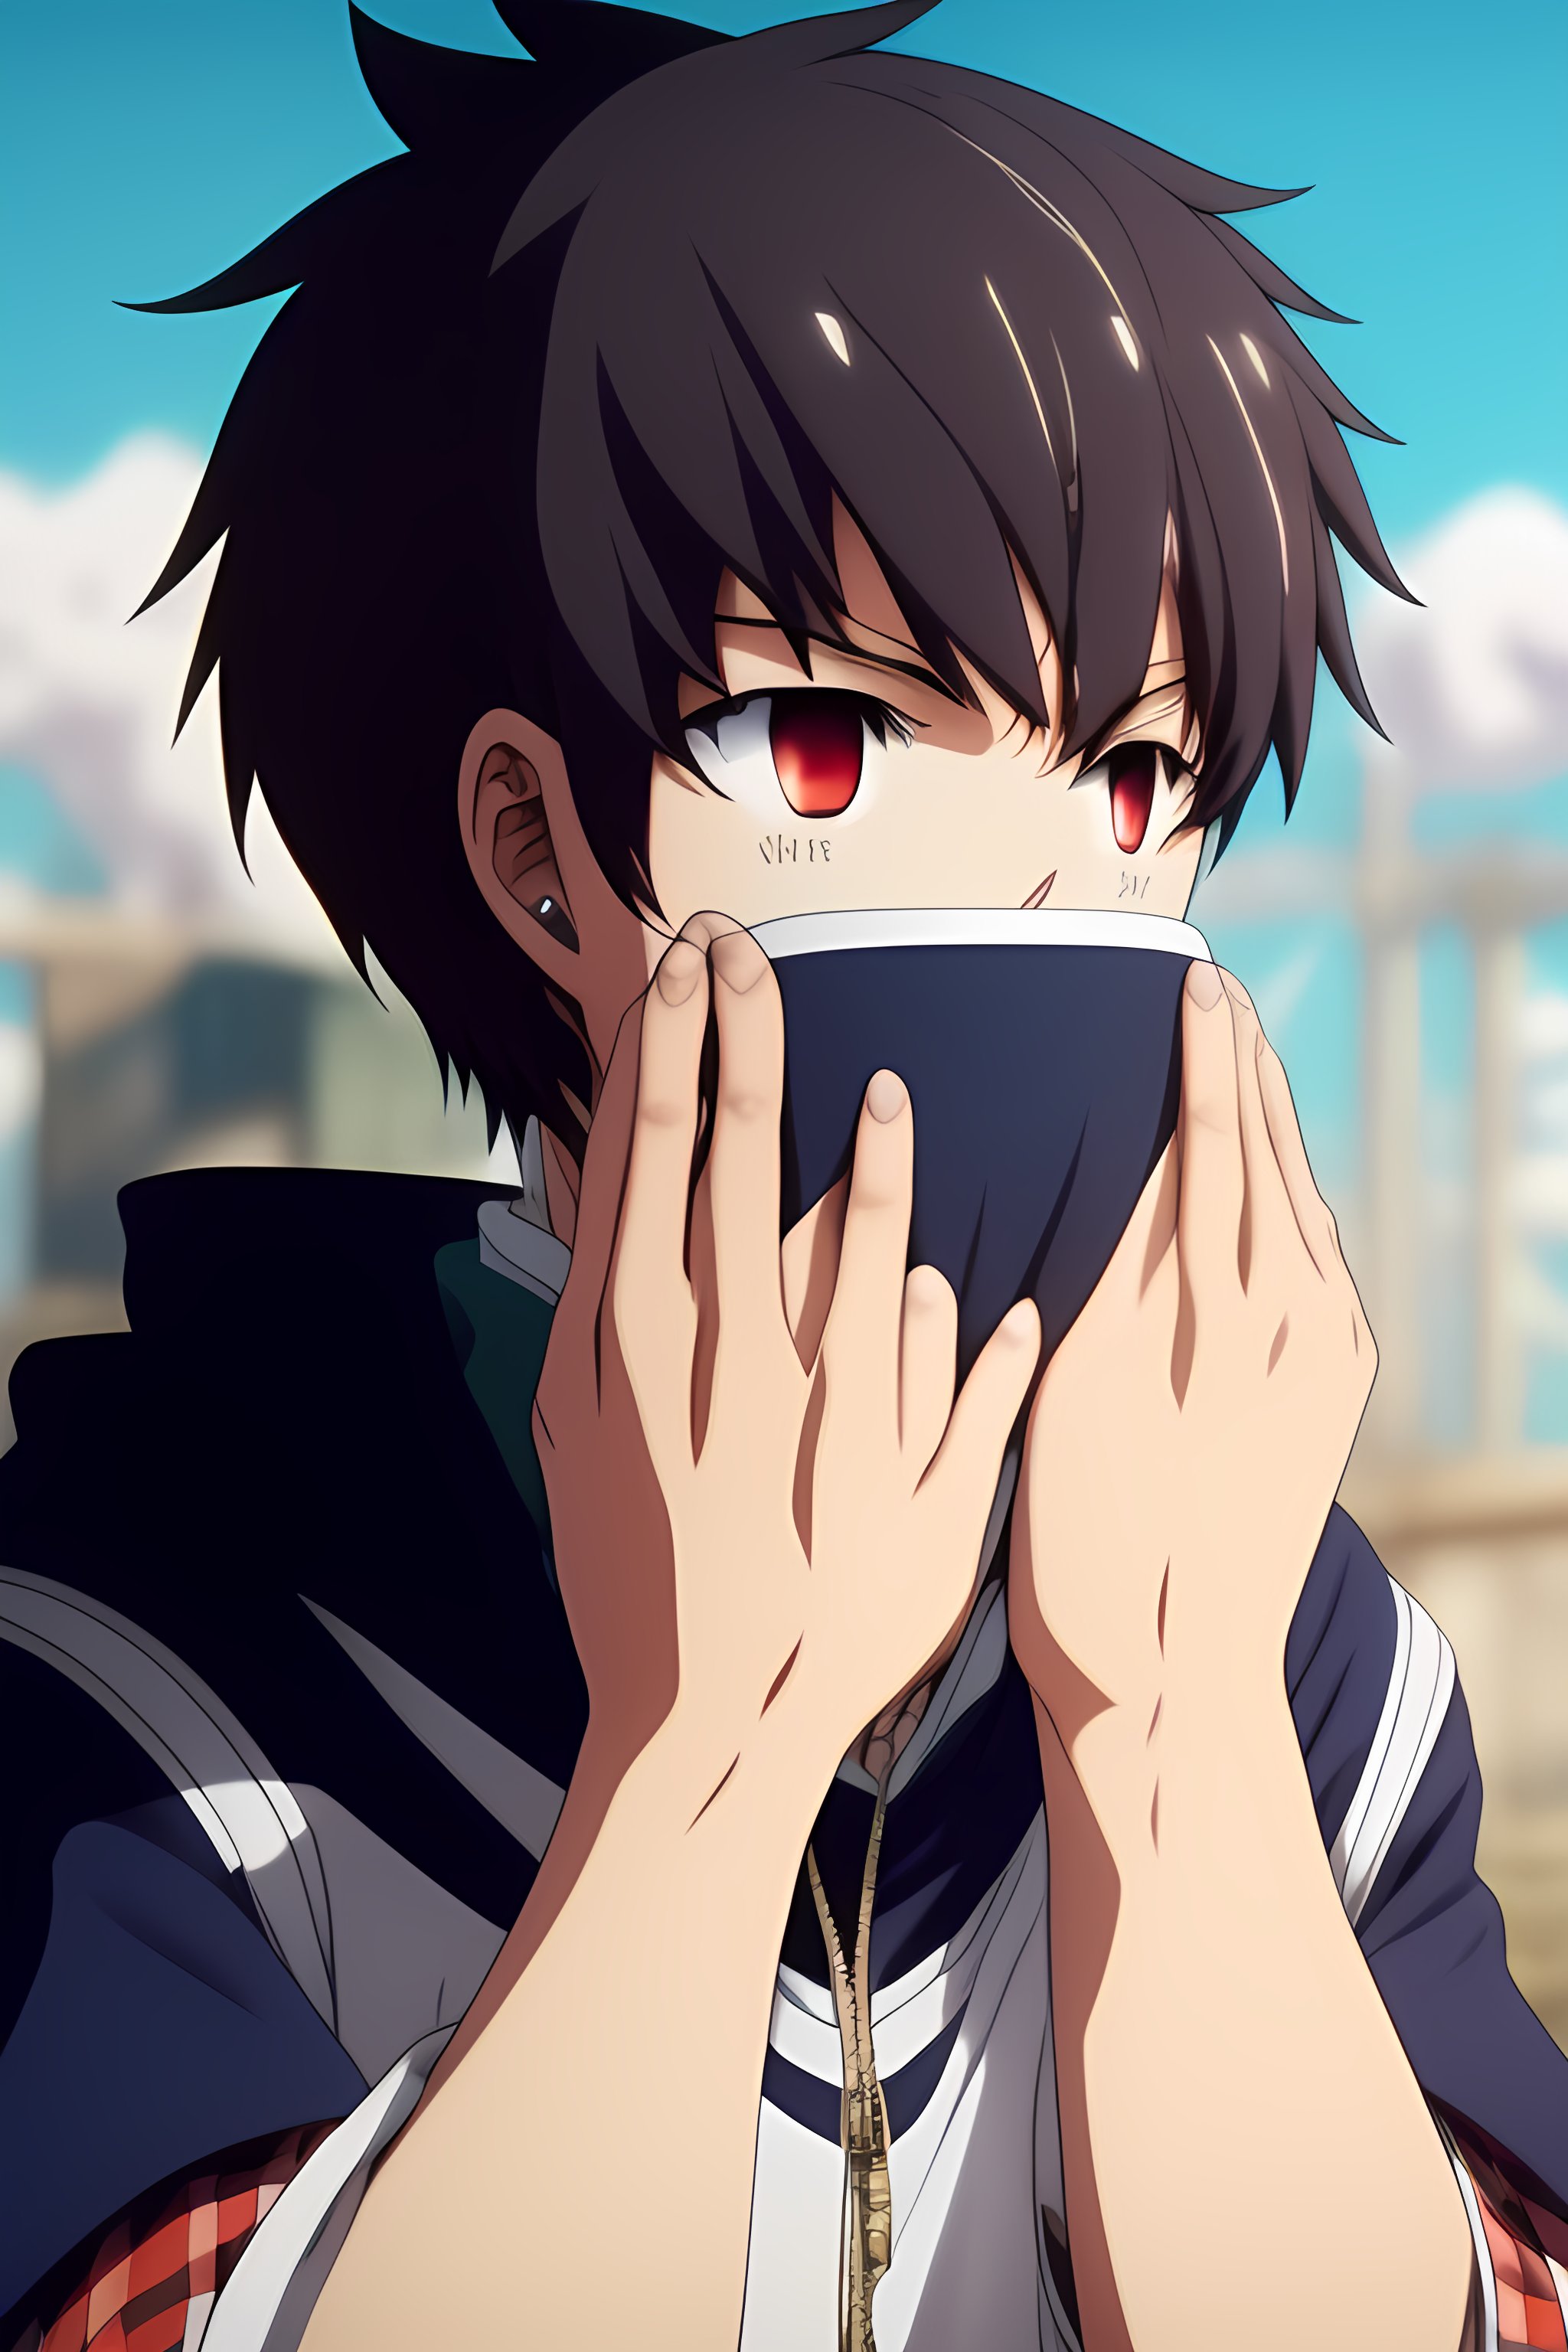 Lexica - A scared anime boy covers his face with his hands, a